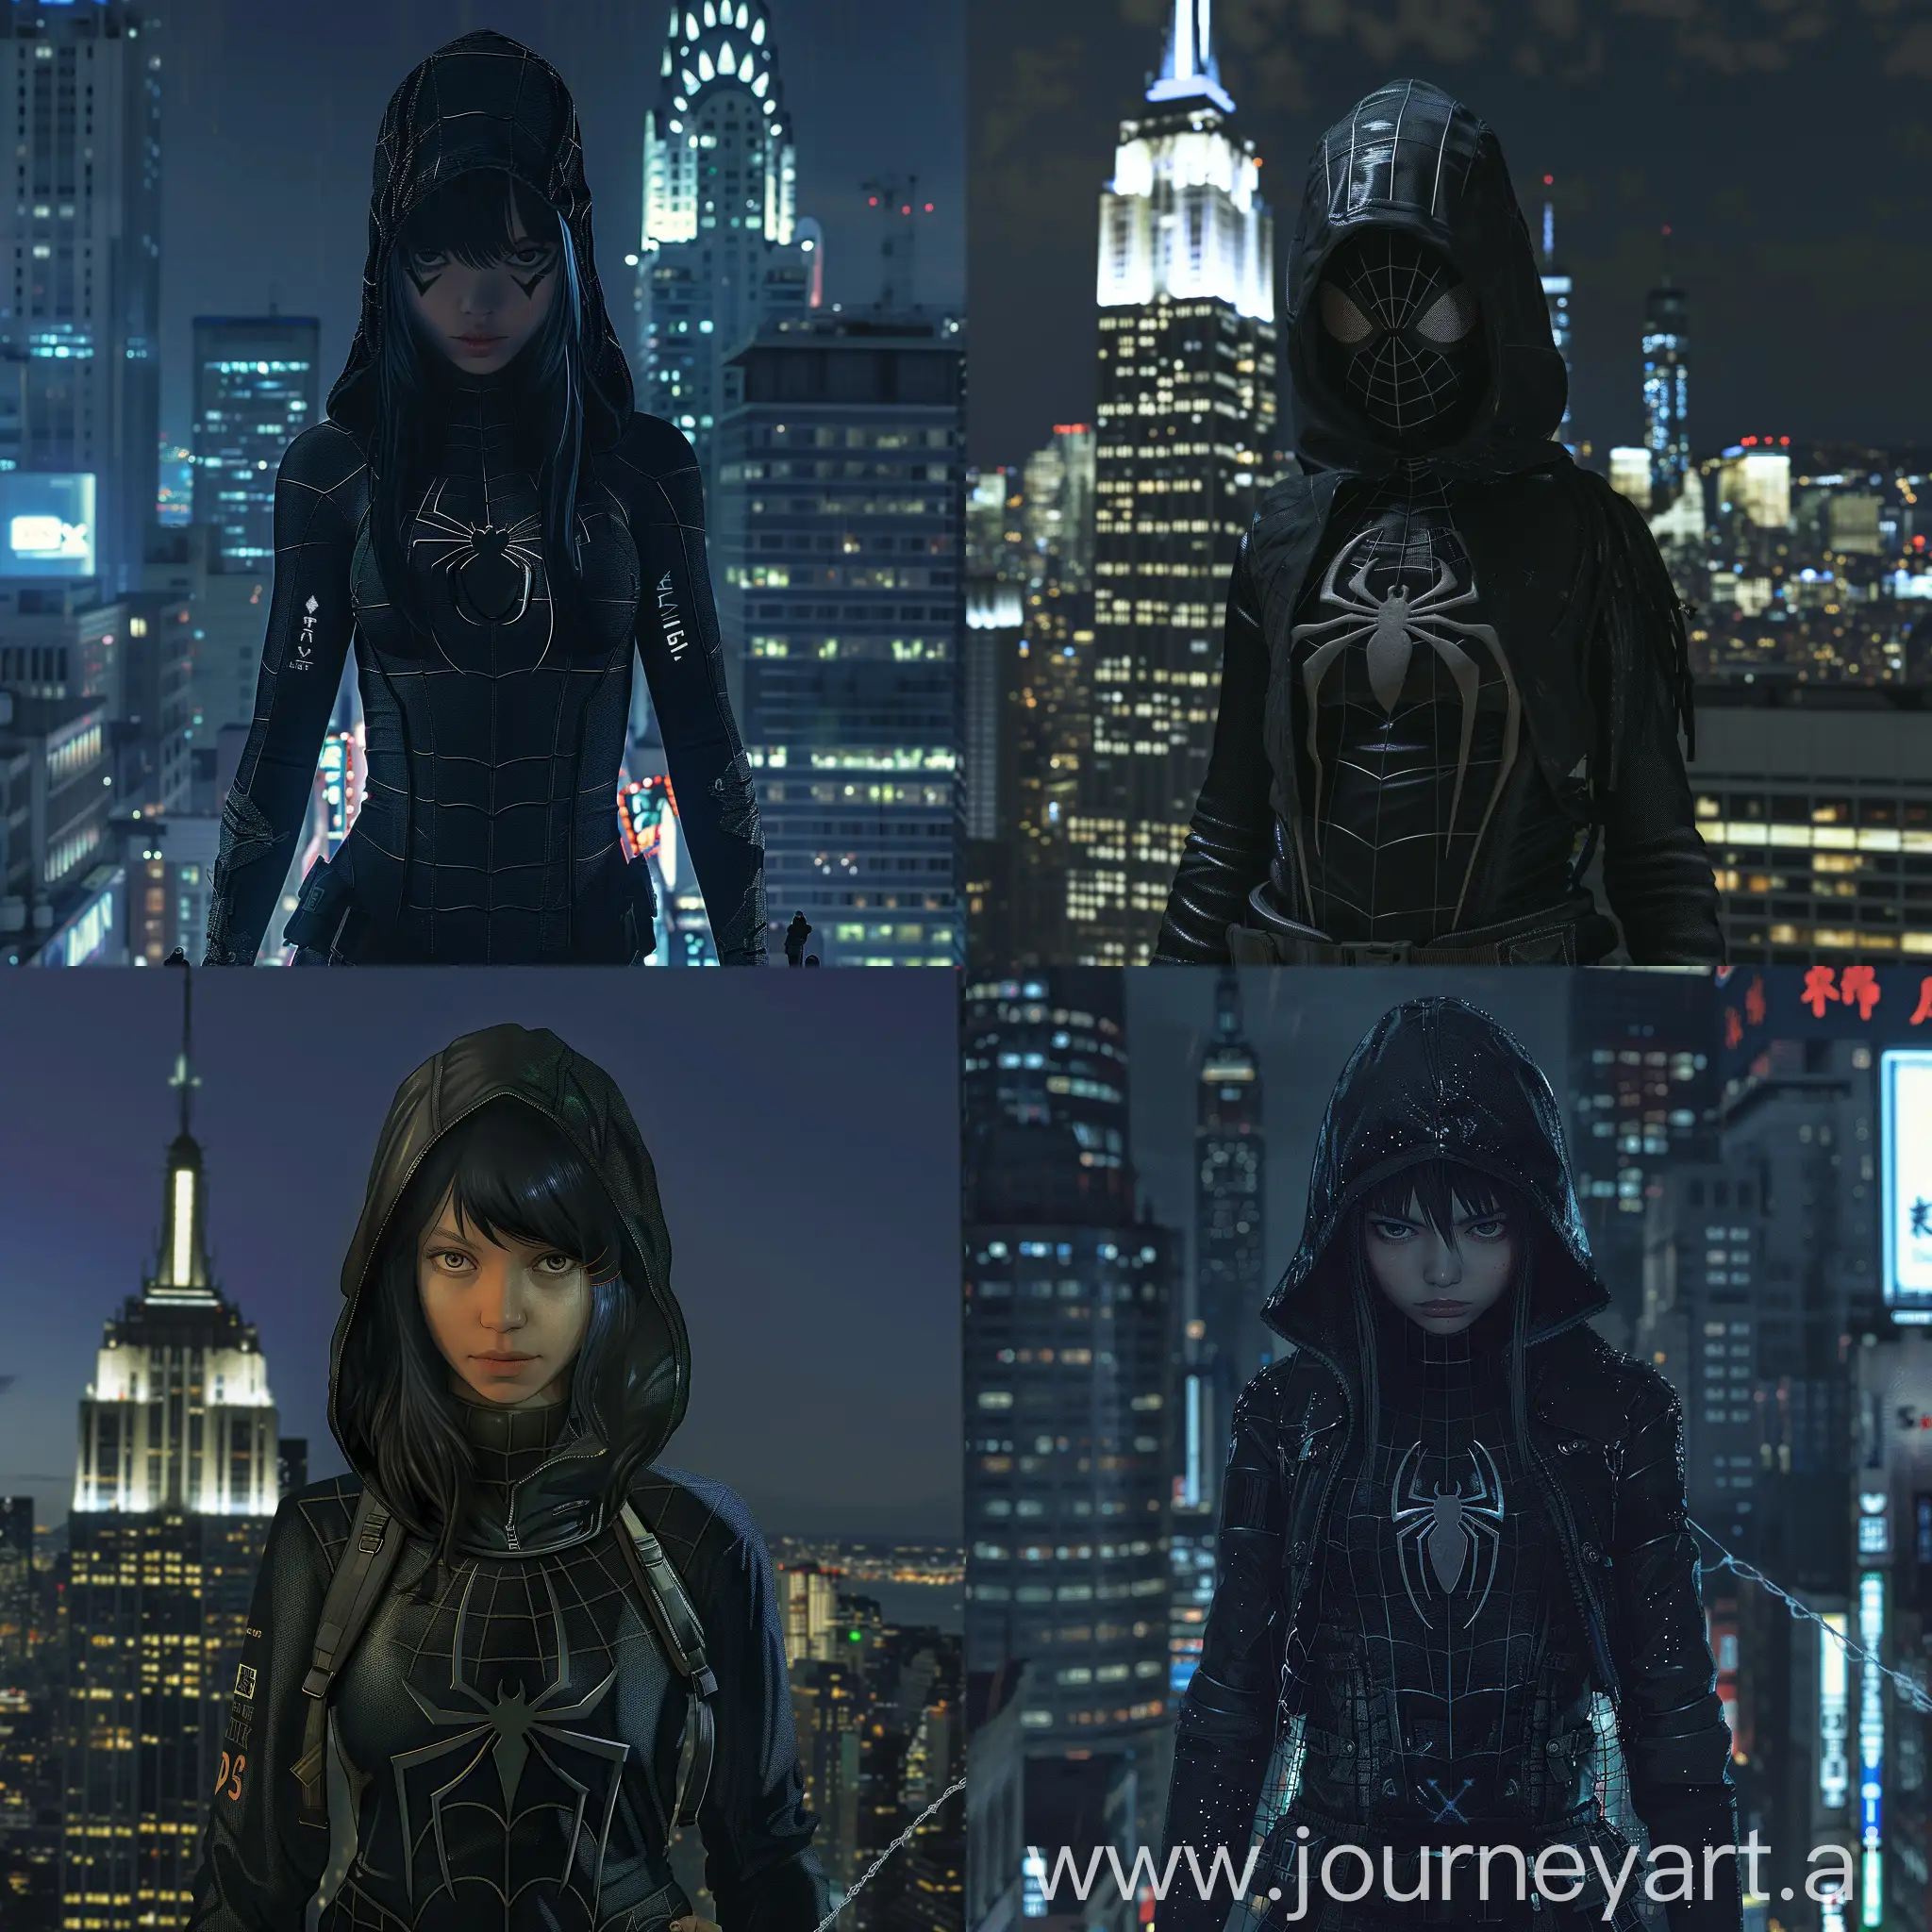 SpiderMan-Costumed-Girl-at-Nighttime-Cityscape